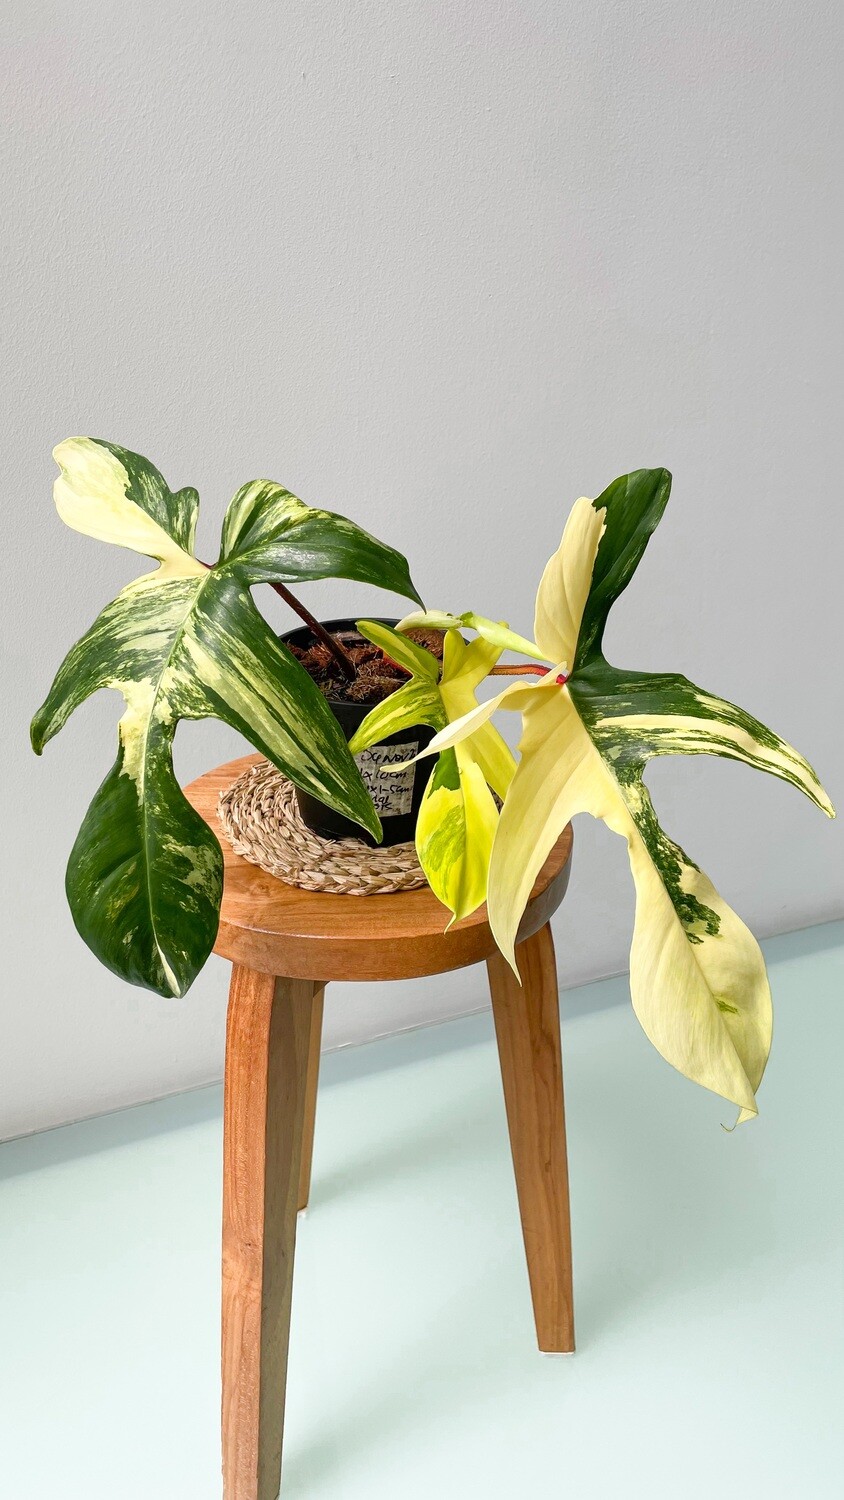 Philodendron Florida Beauty (Variegated)